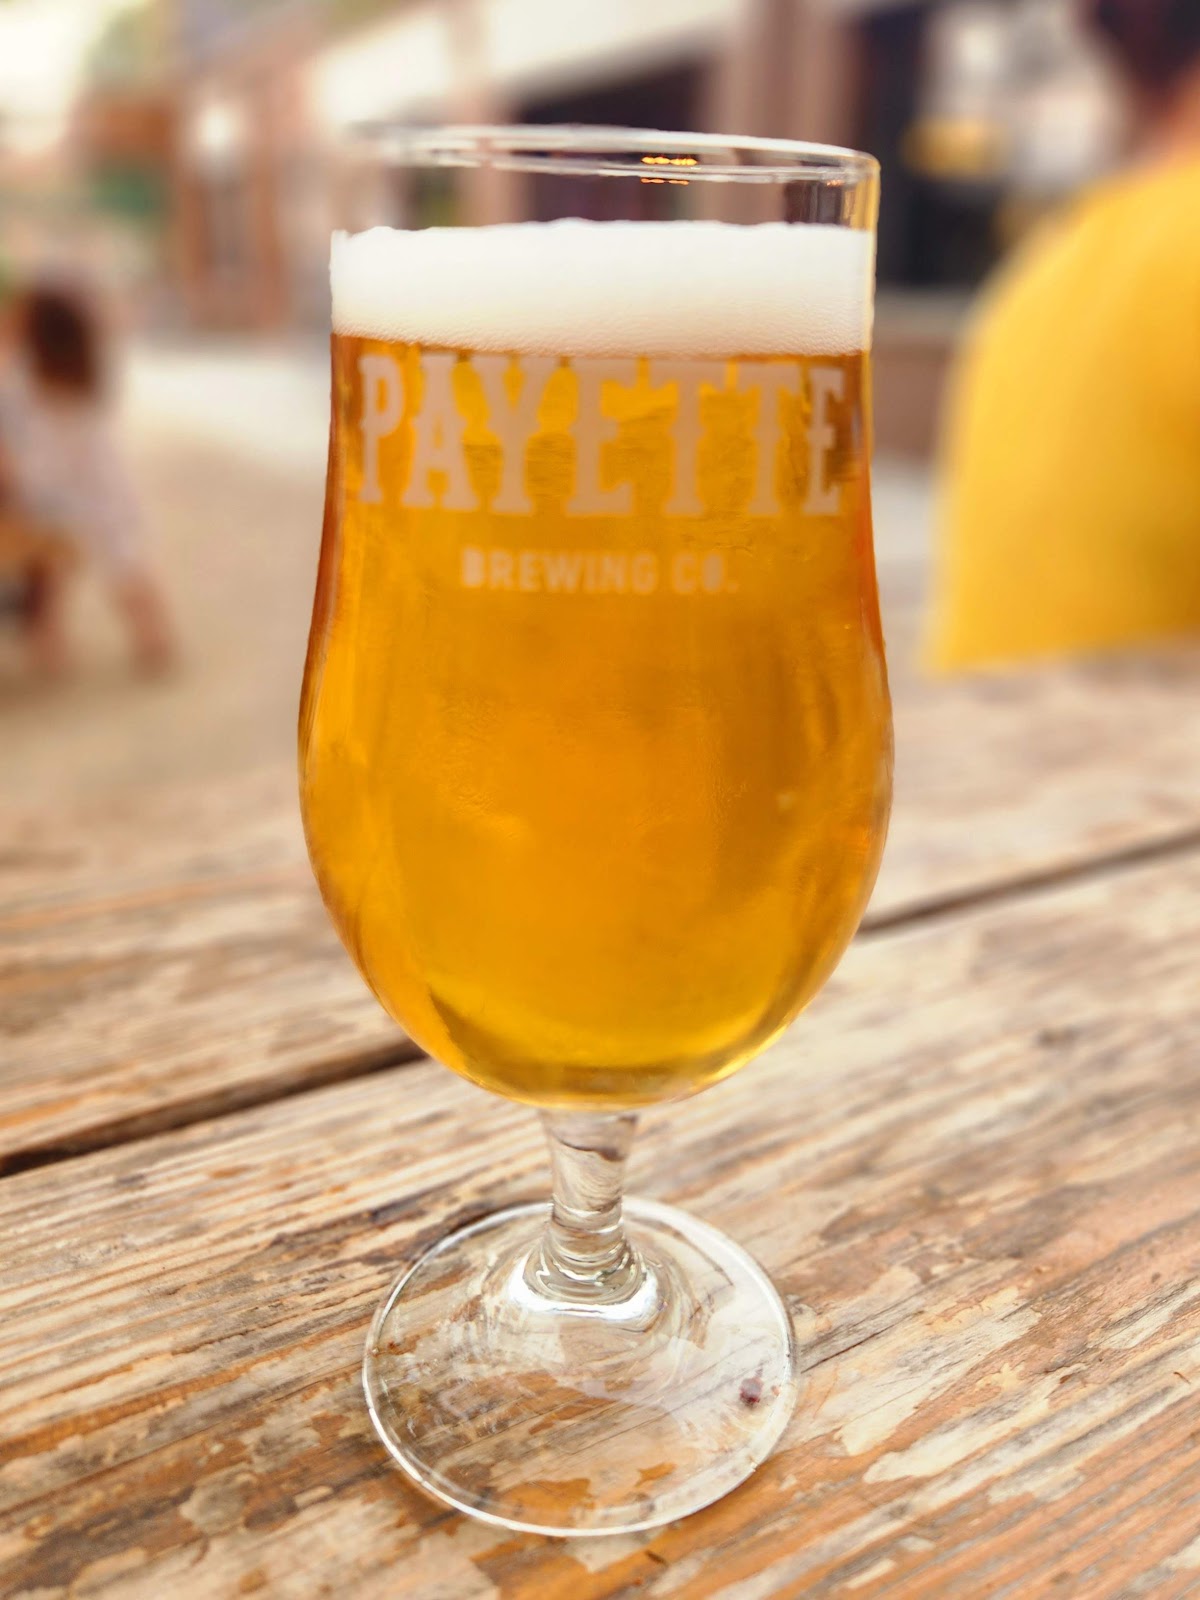 Payette Brewing Company 4